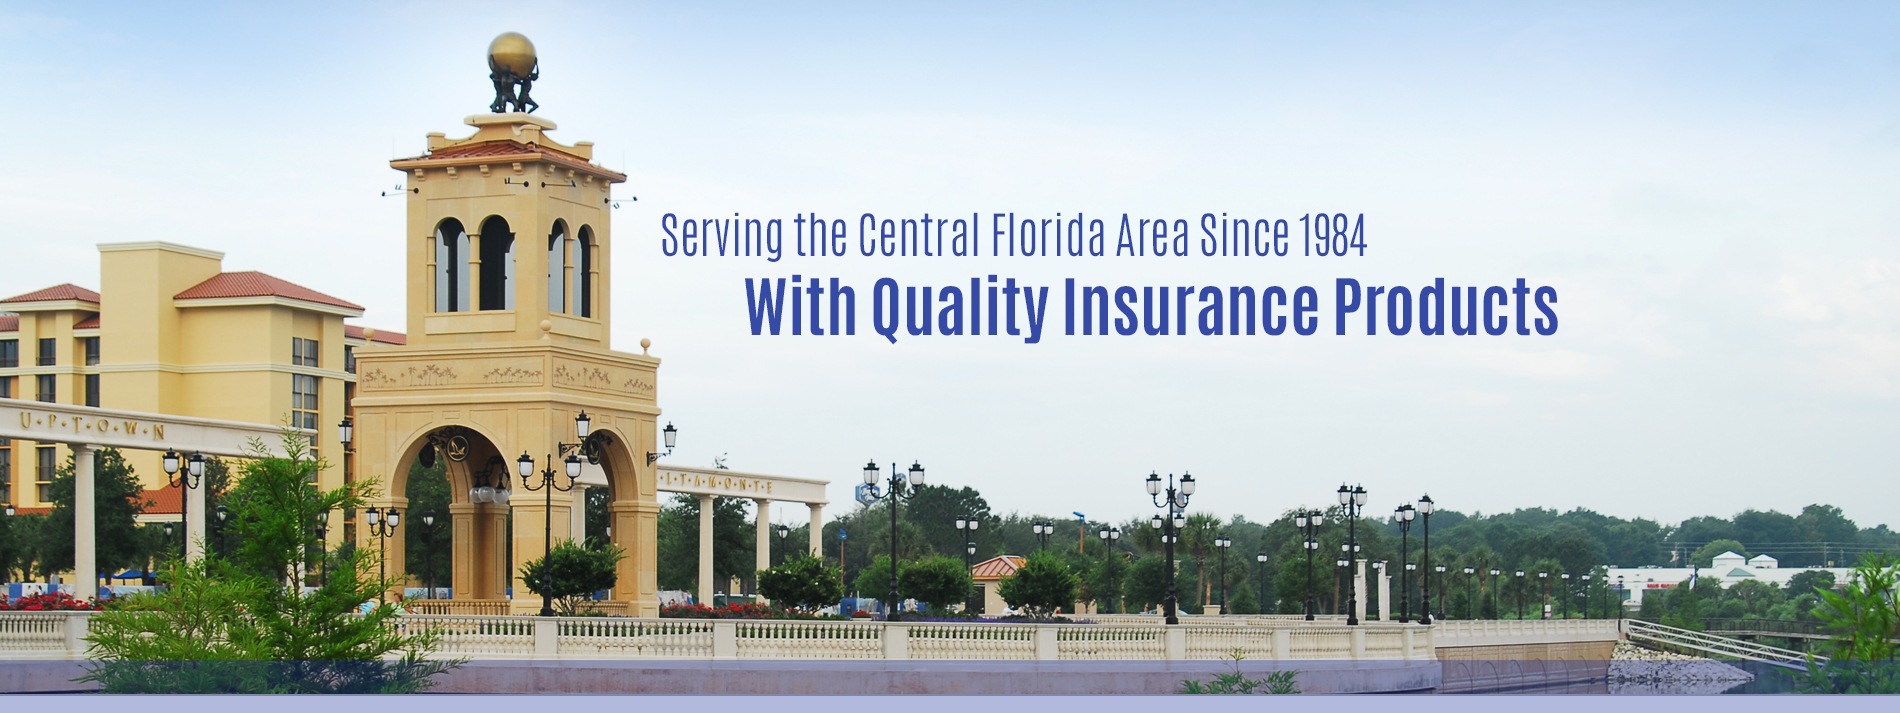 Serving the Central Florida Area since 1984 with quality insurance products.